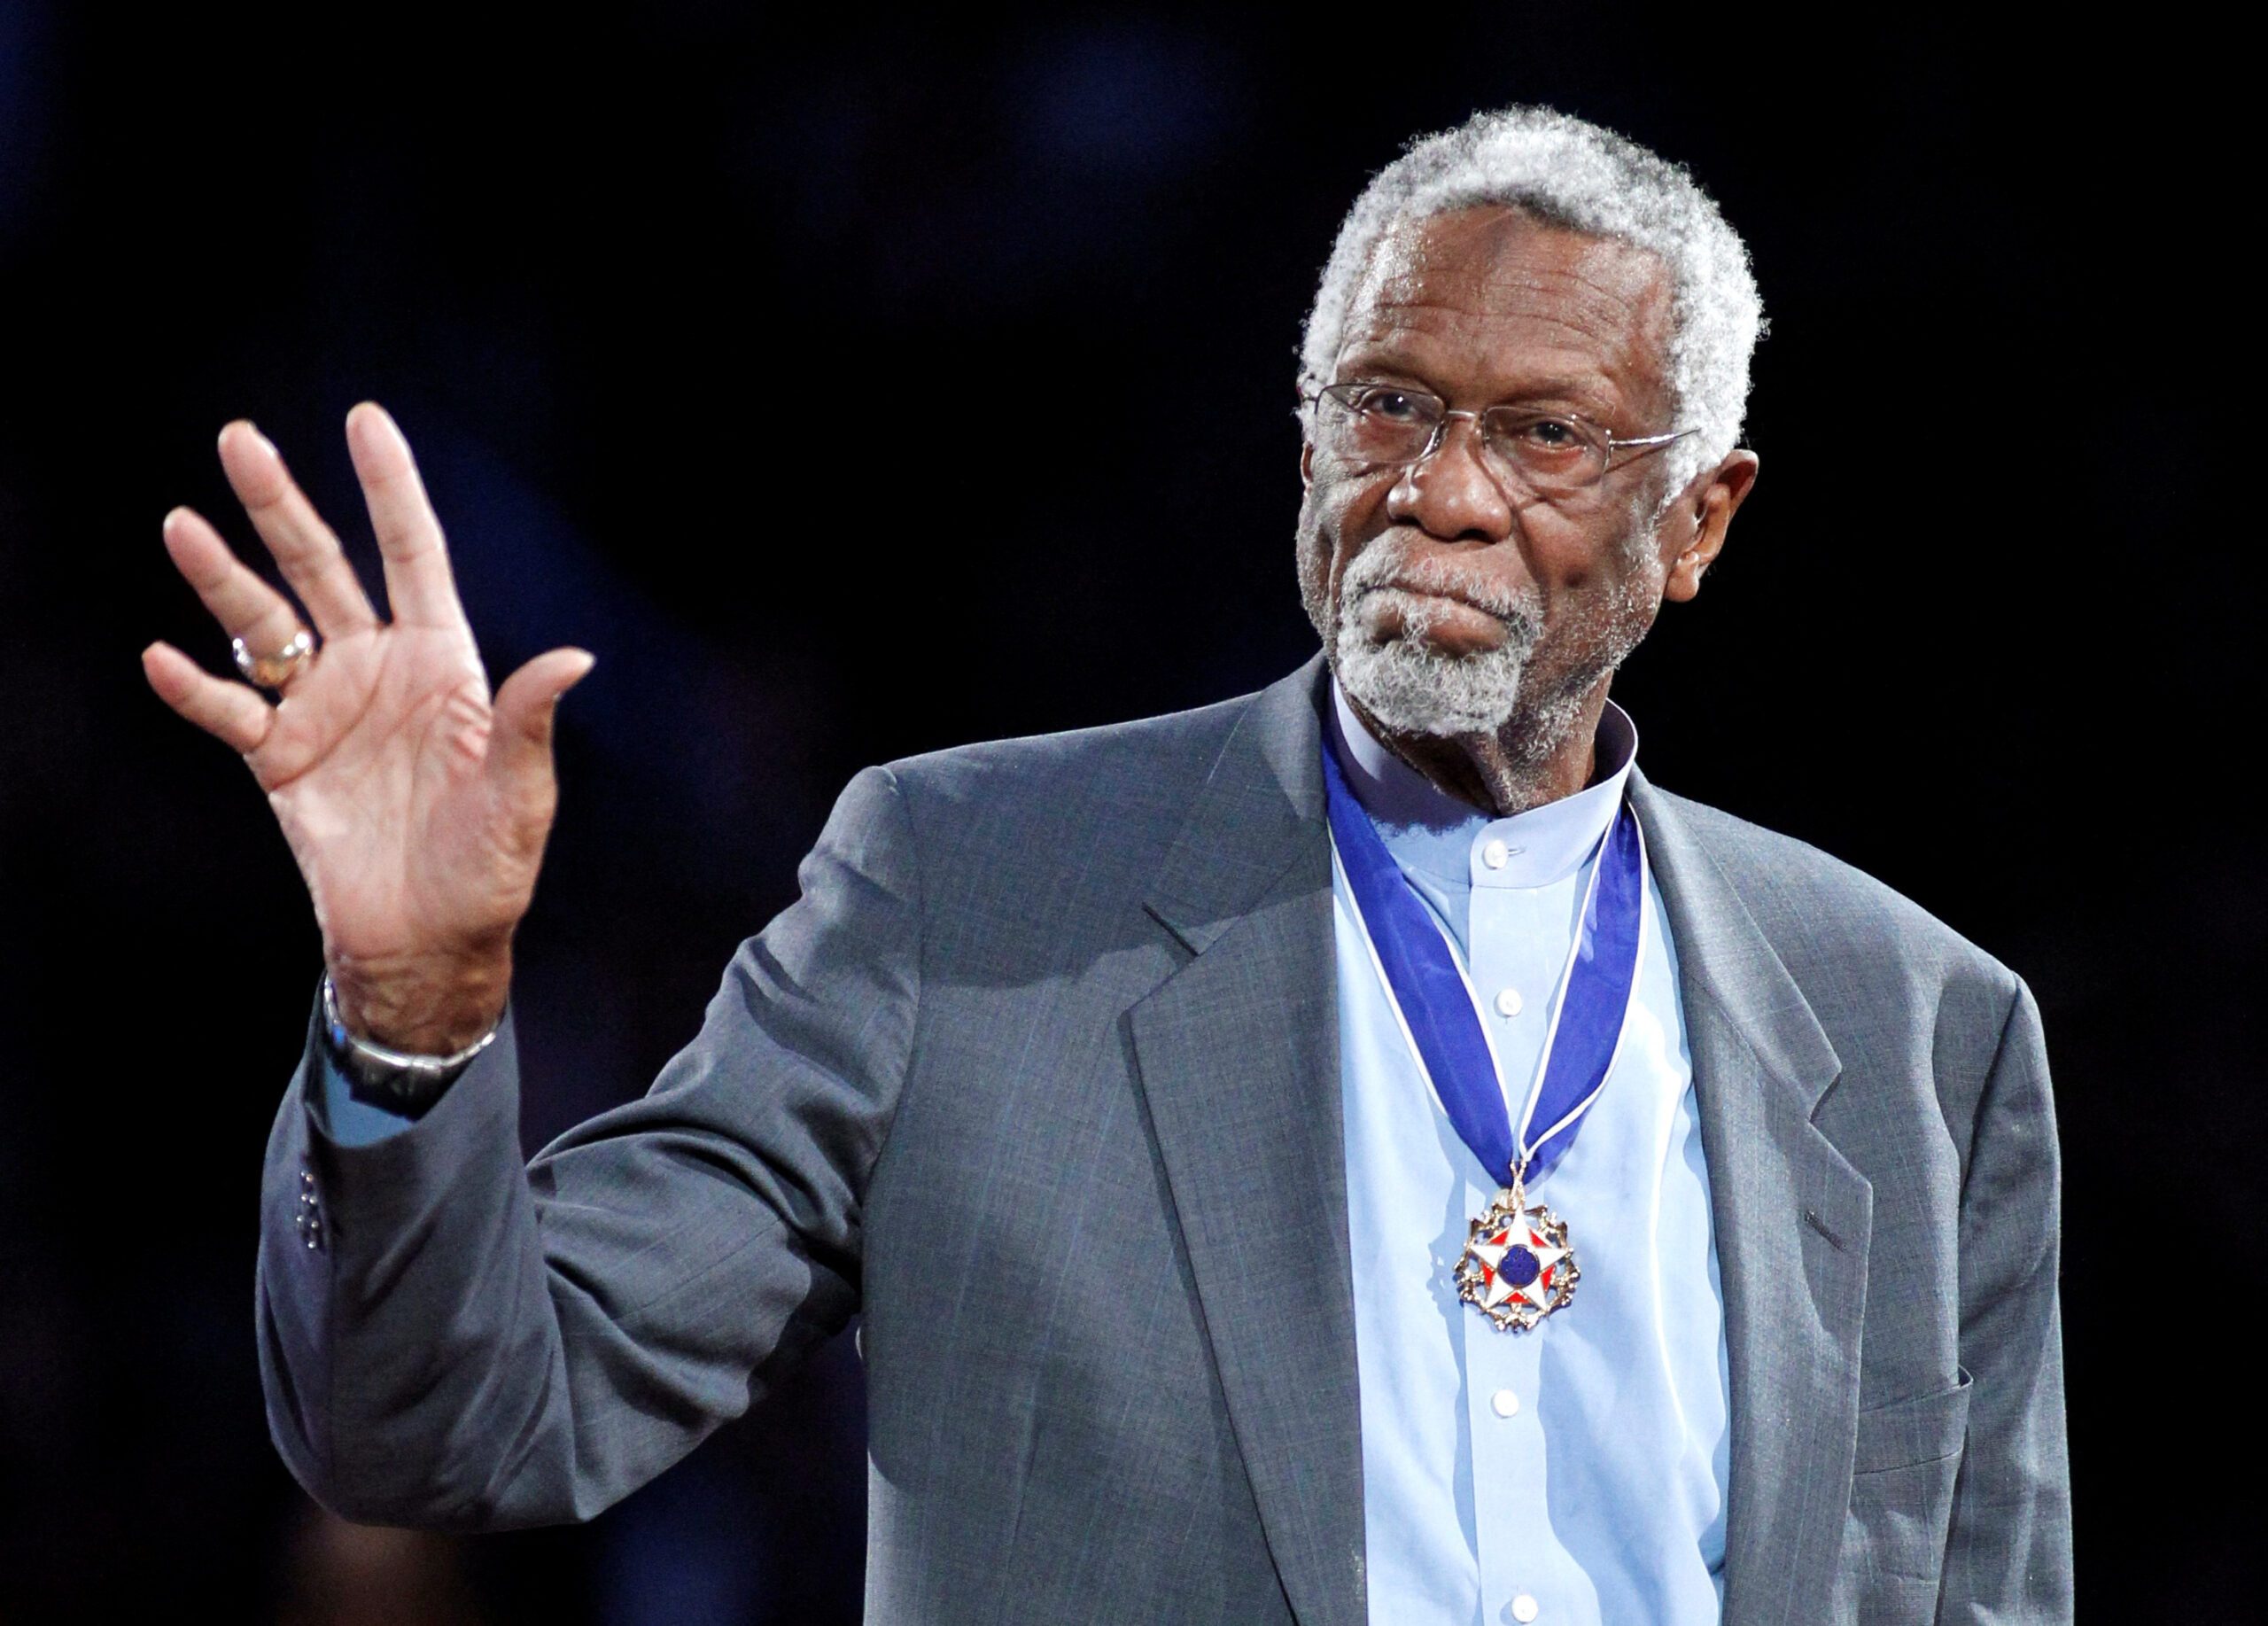 Boston Celtics add No. 6 to home court in celebration of Bill Russell